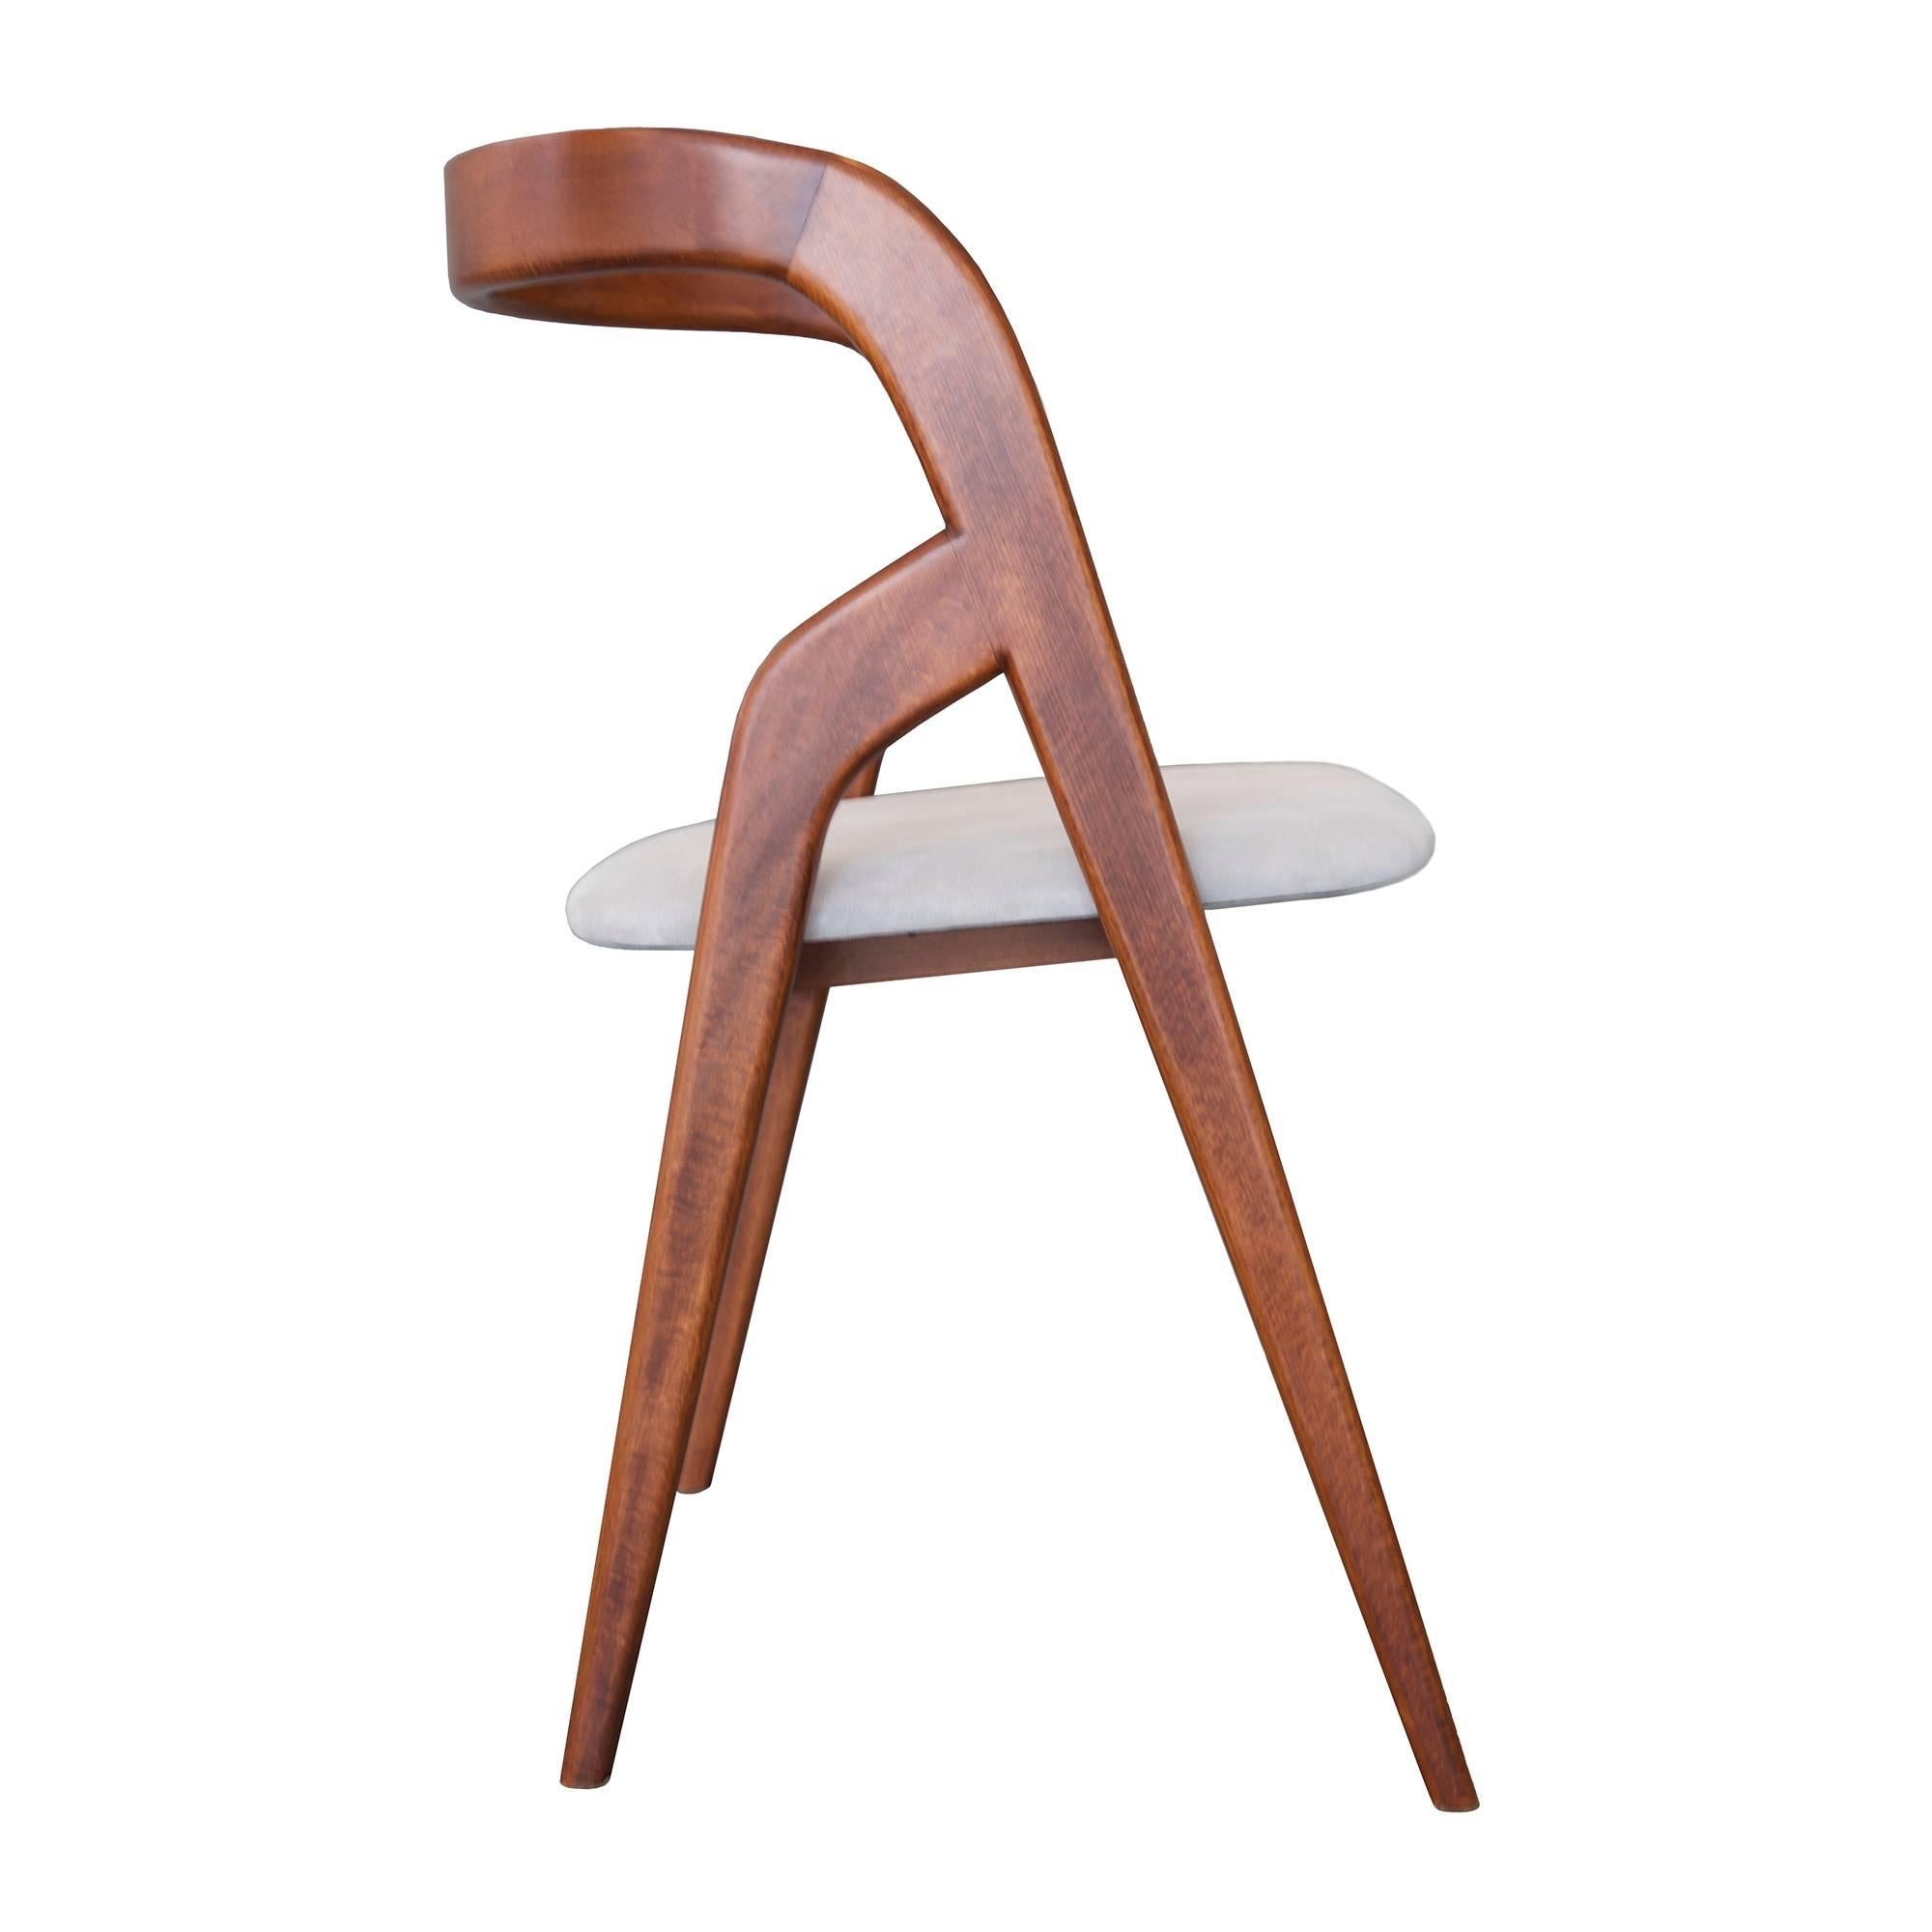 Chair in Suede and Wood designed by architect Vincenzo De Cotiis